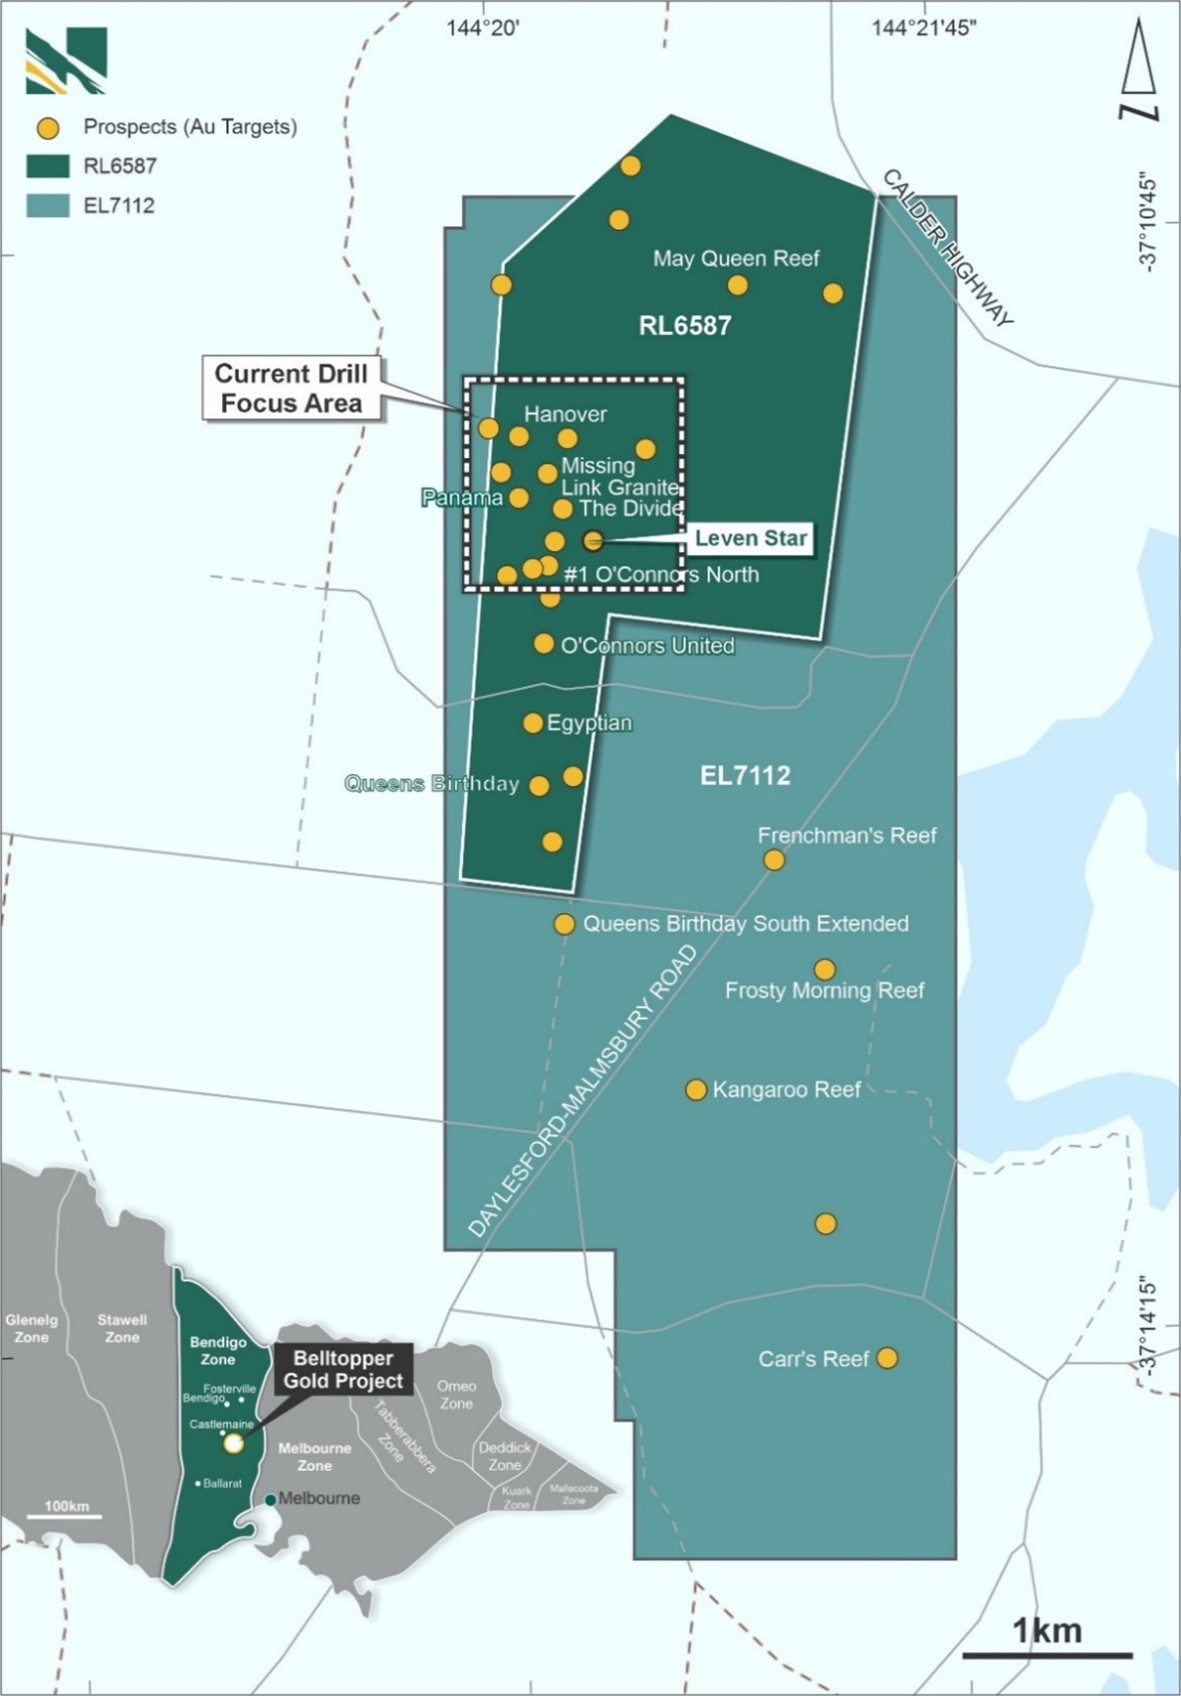 The Belltopper Gold Project location map with focus area for recent completed drilling.